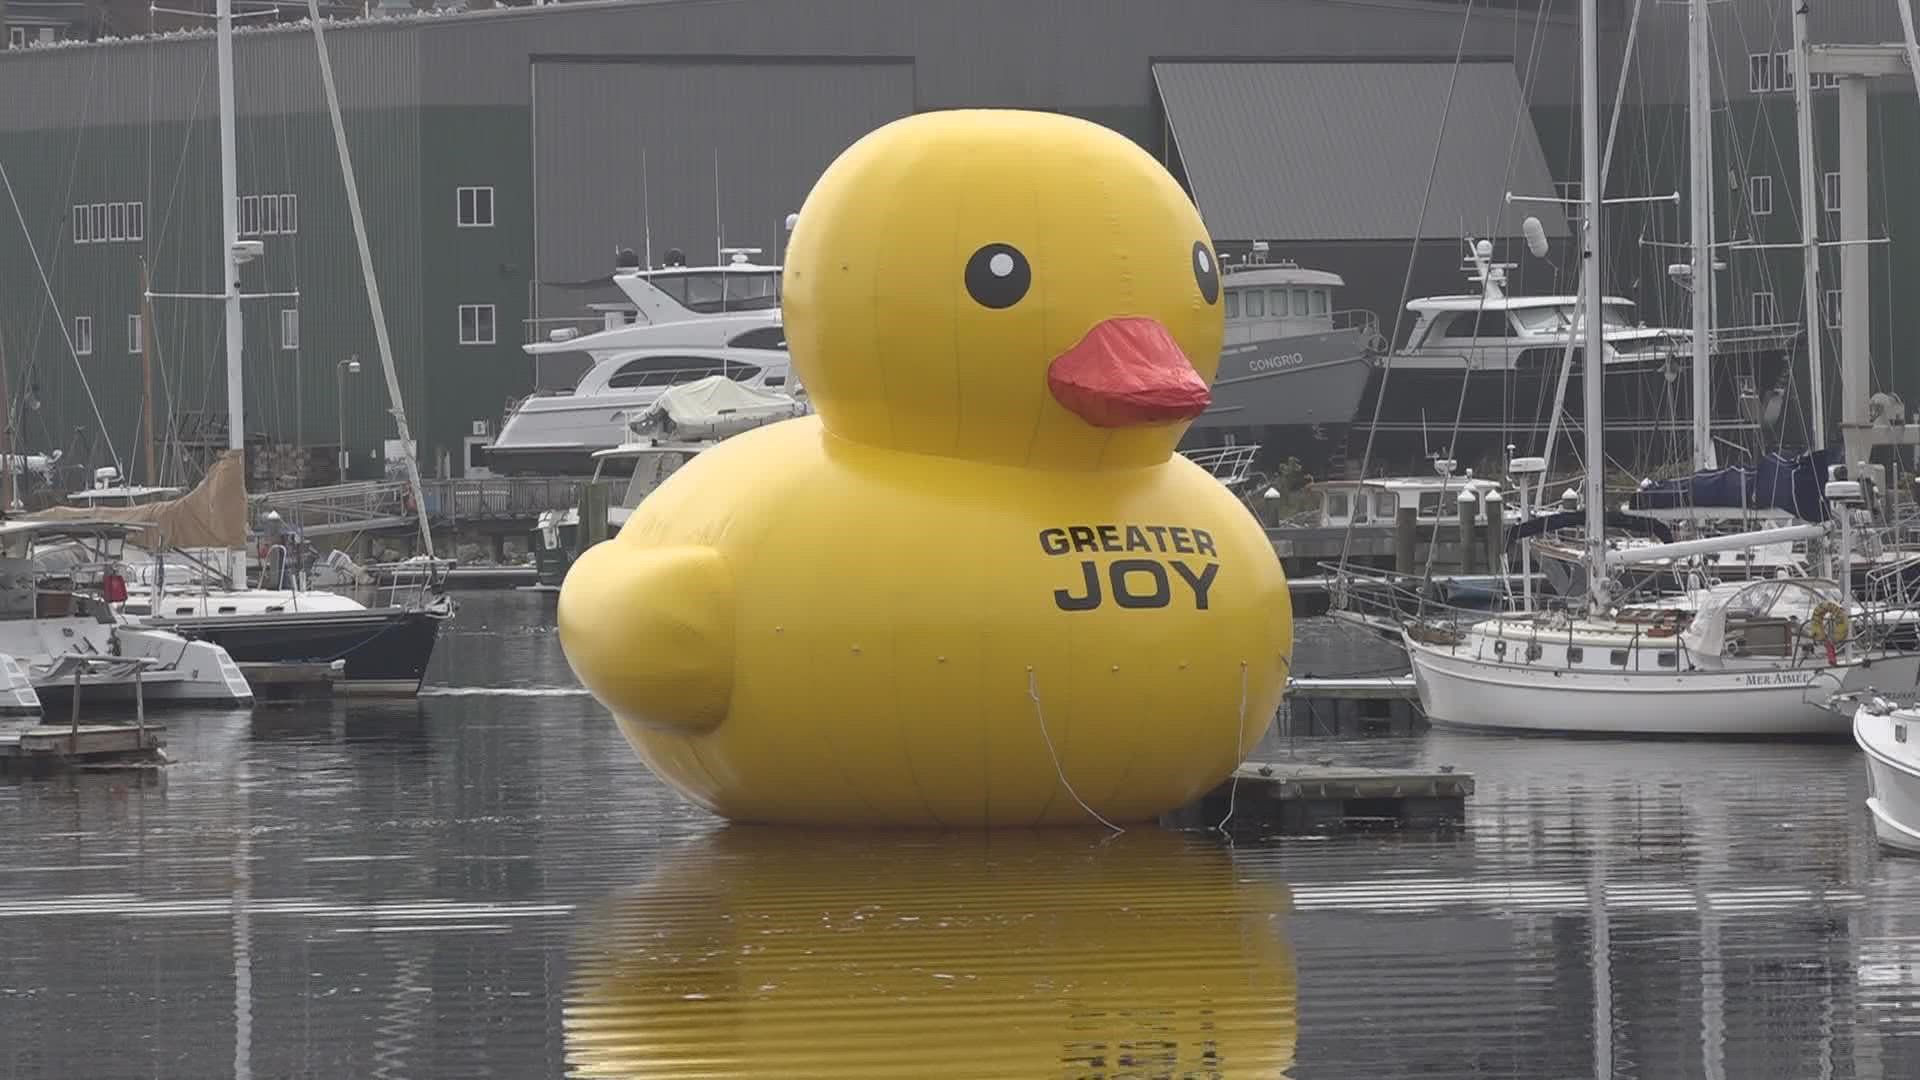 The massive inflatable duck is once again floating in the harbor, but with a new message.